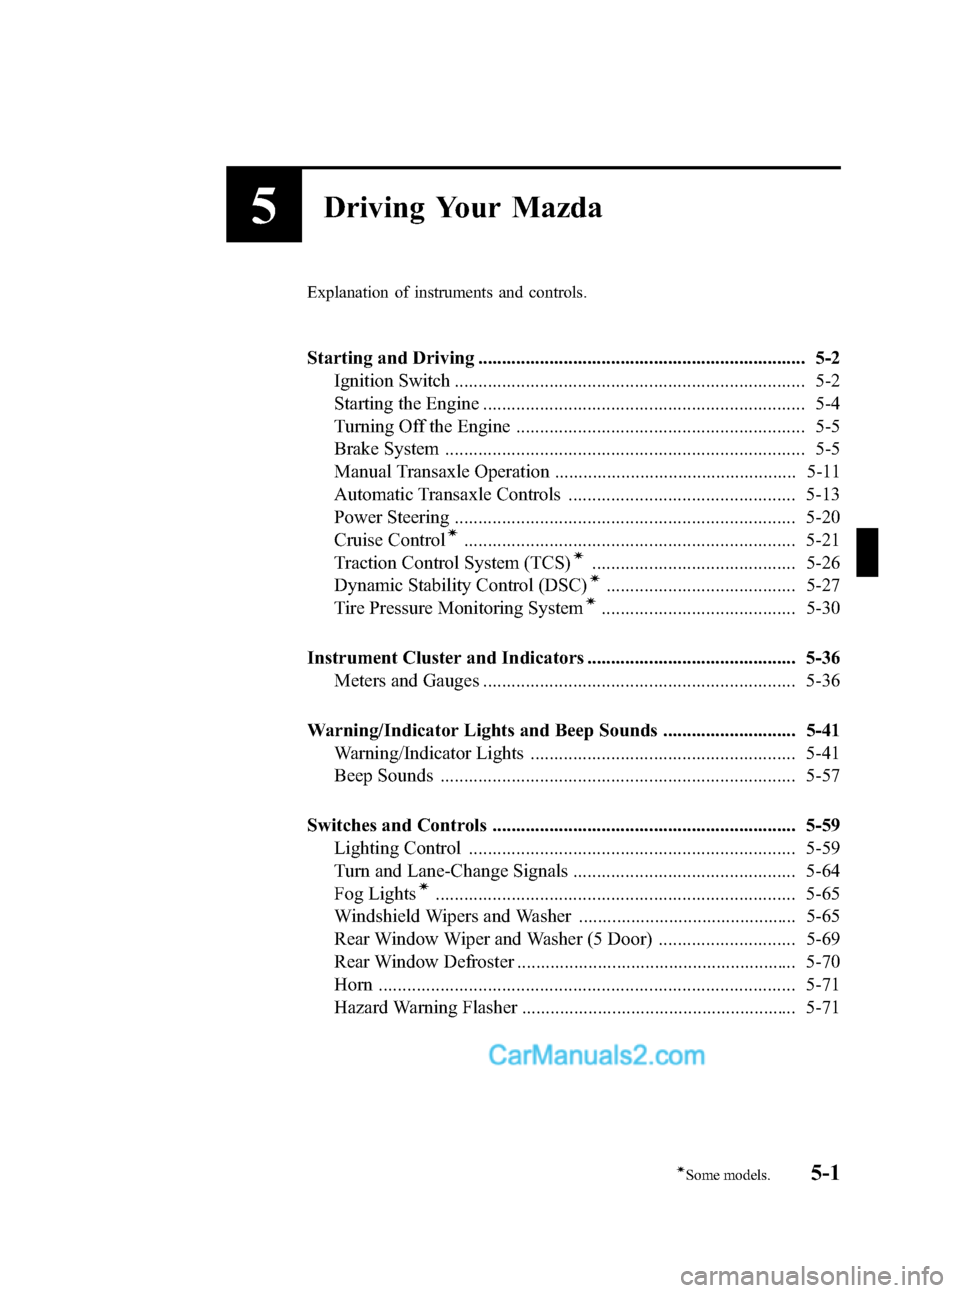 MAZDA MODEL MAZDASPEED 3 2012  Owners Manual (in English) Black plate (161,1)
5Driving Your Mazda
Explanation of instruments and controls.
Starting and Driving ..................................................................... 5-2
Ignition Switch ........